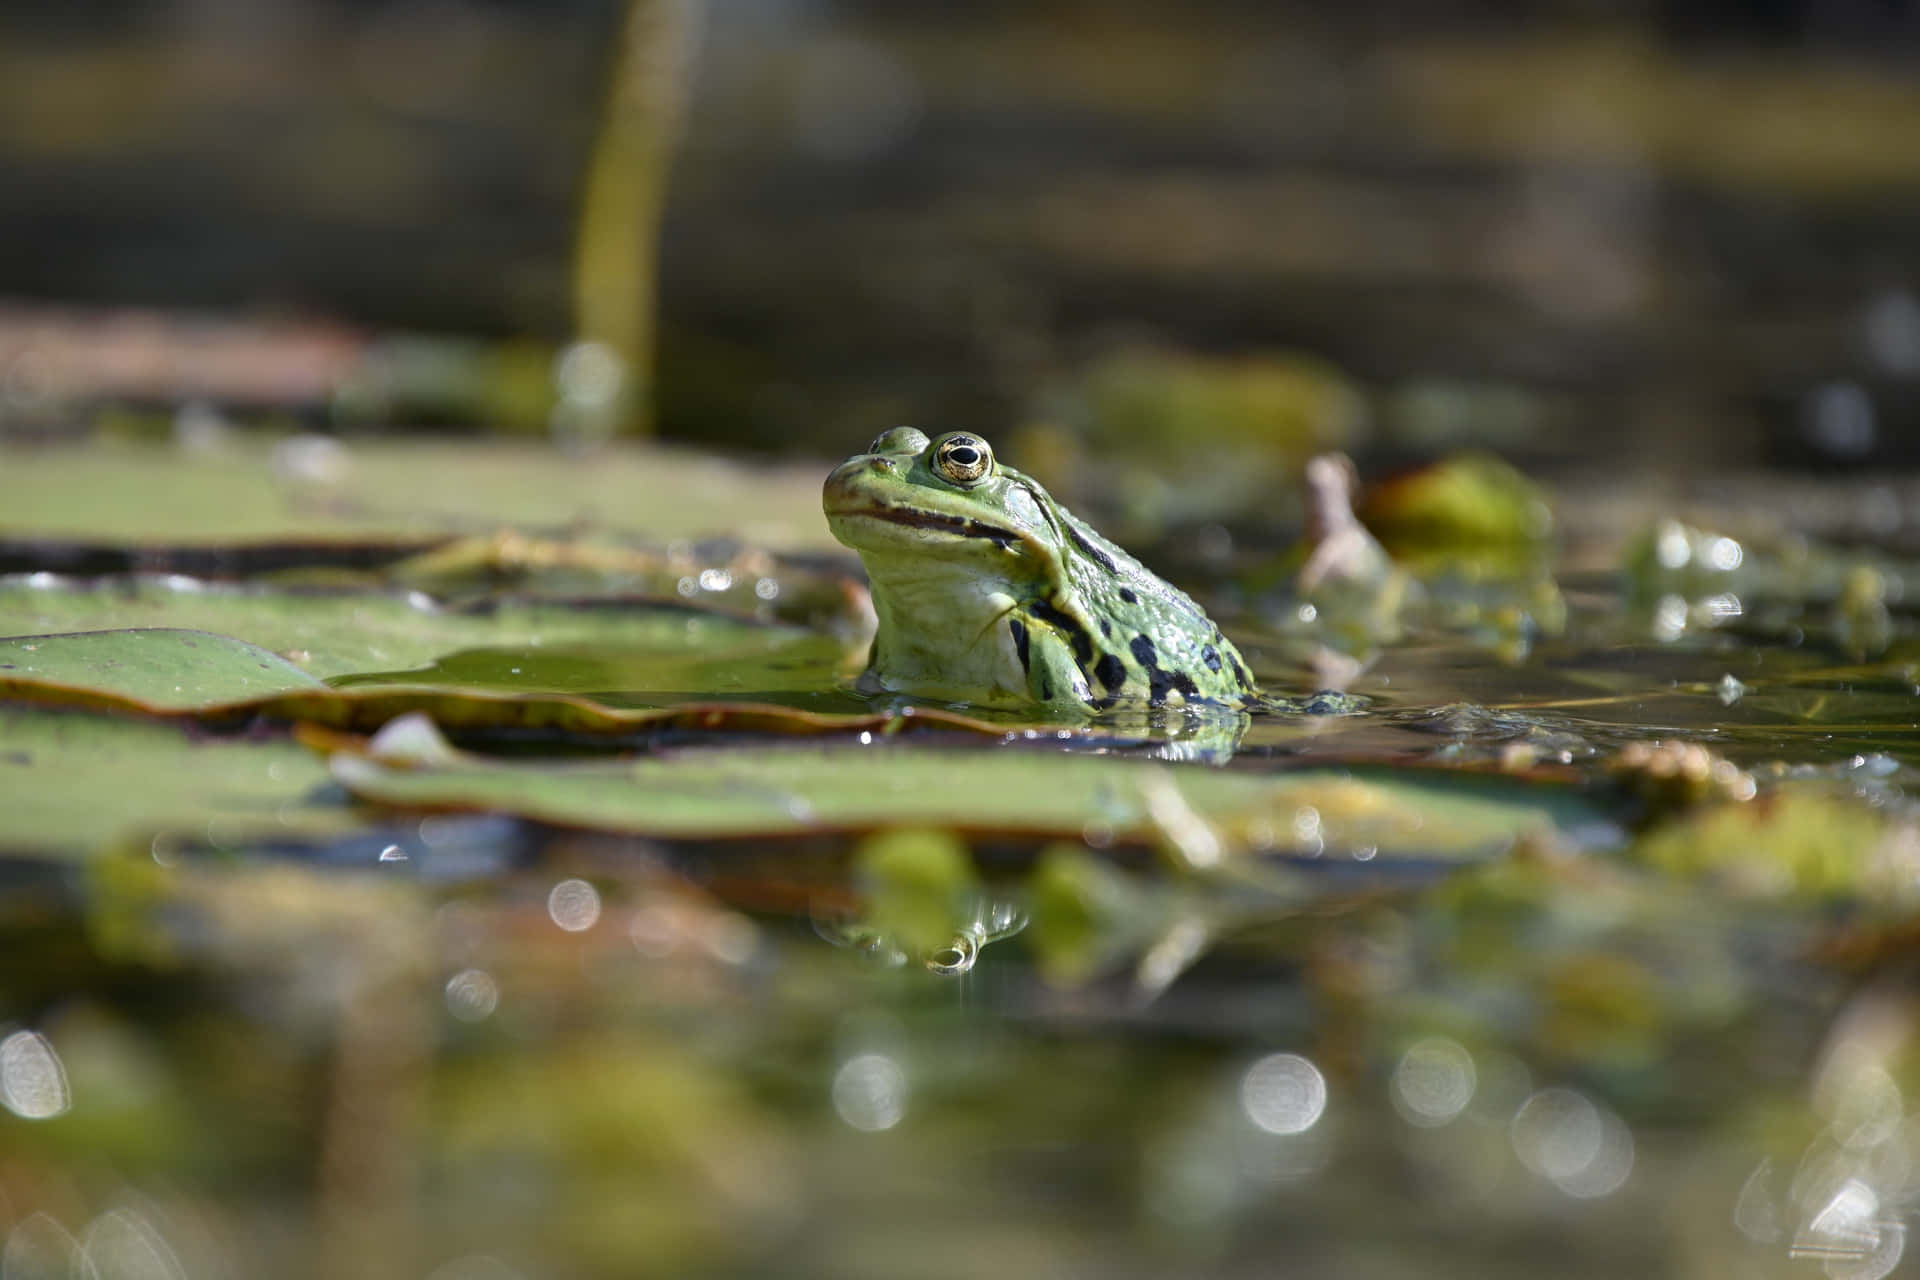 A Frog Is Sitting In The Water With Lily Pads